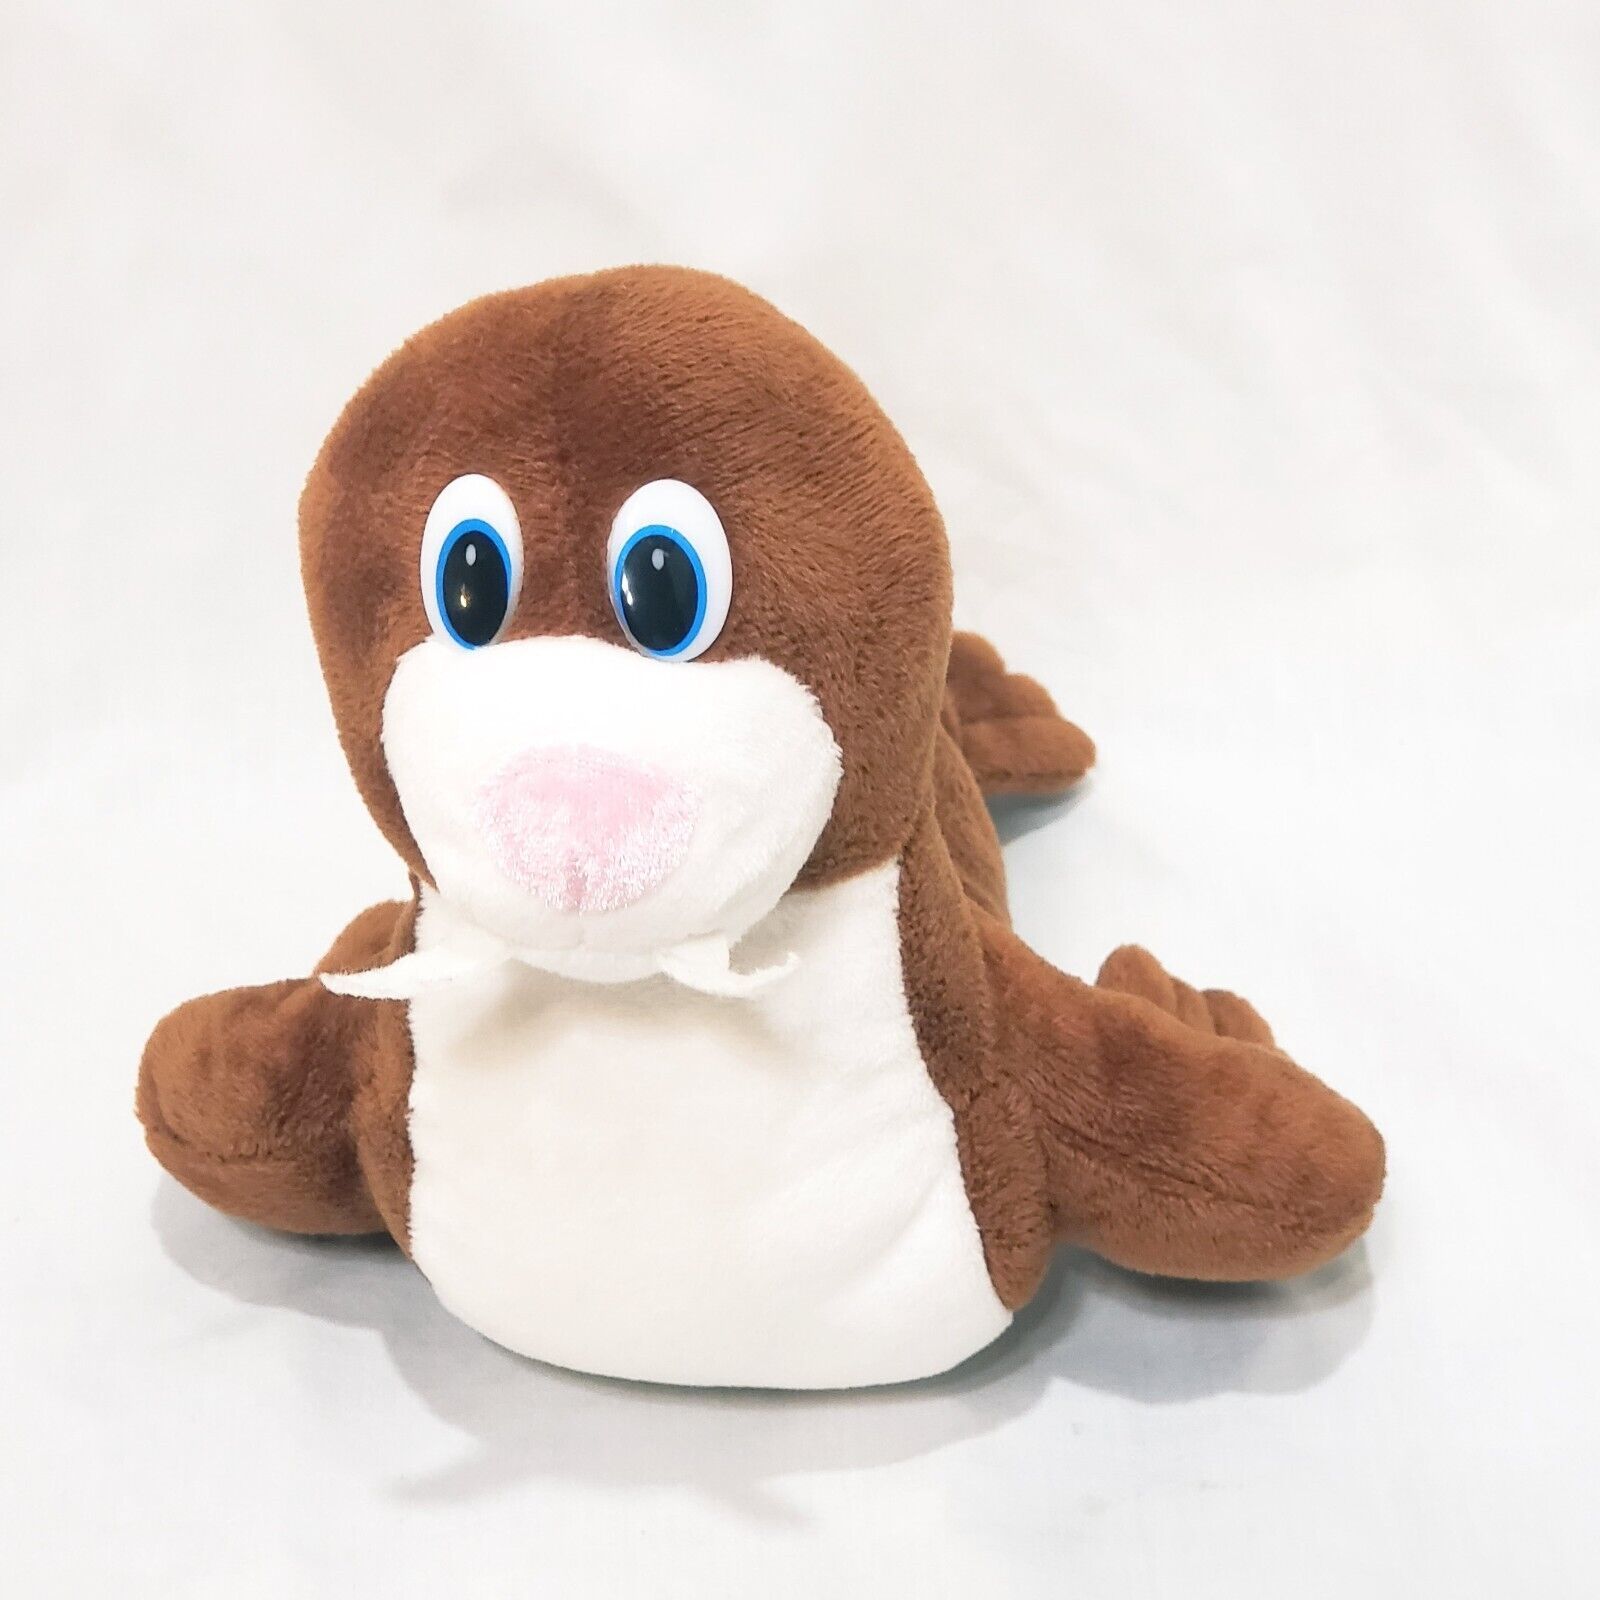 Walrus Plush Stuffed Animal 9 inches Long Ideal Toys Direct Brown White 2018 - $15.83